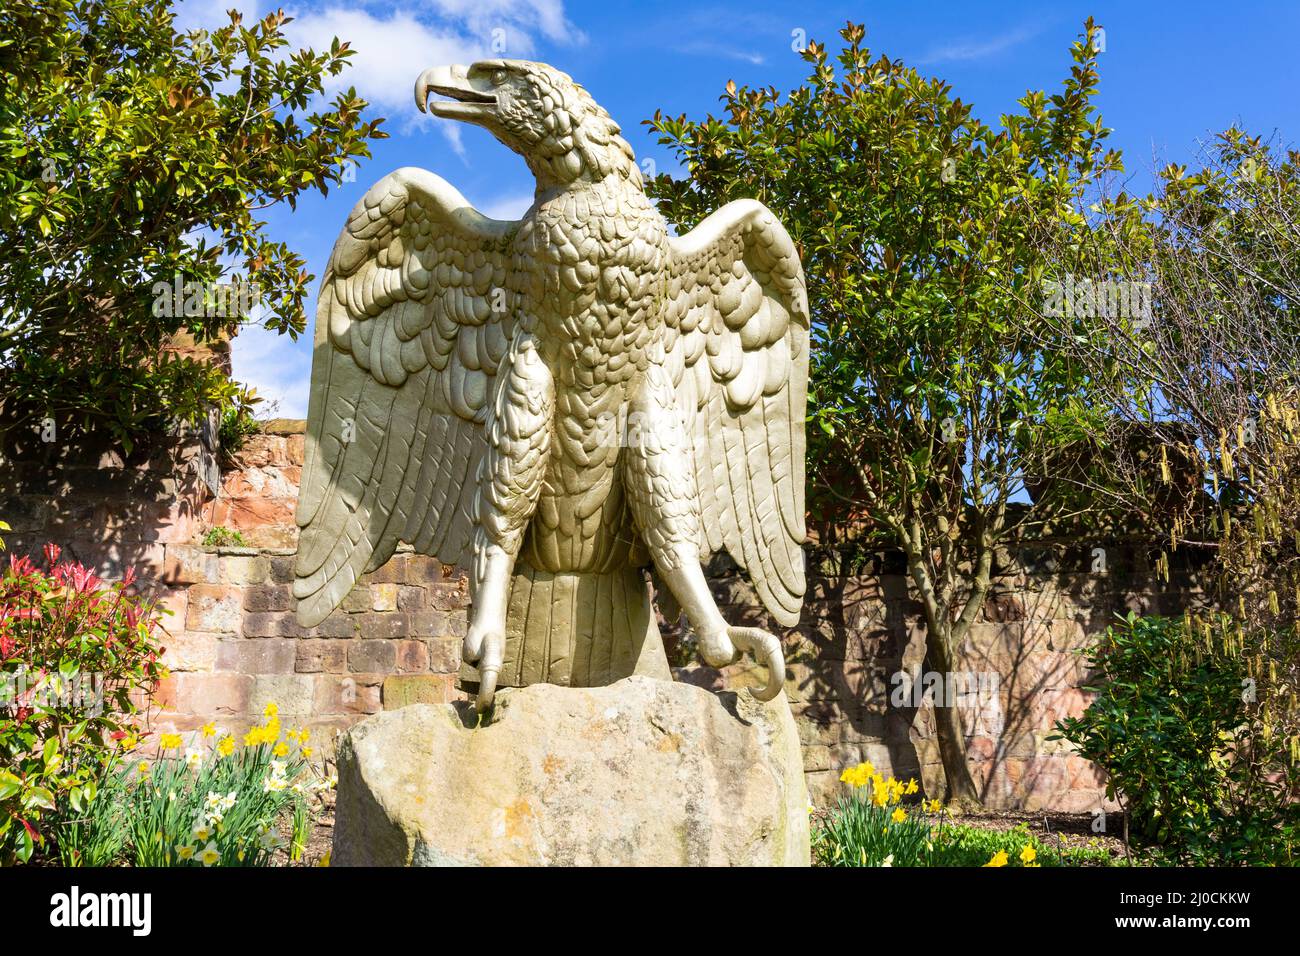 A Golden German eagle statue taken from Minden barracks in Germany now in the gardens of  Shrewsbury Castle Shrewsbury Shropshire England UK GB Europe Stock Photo